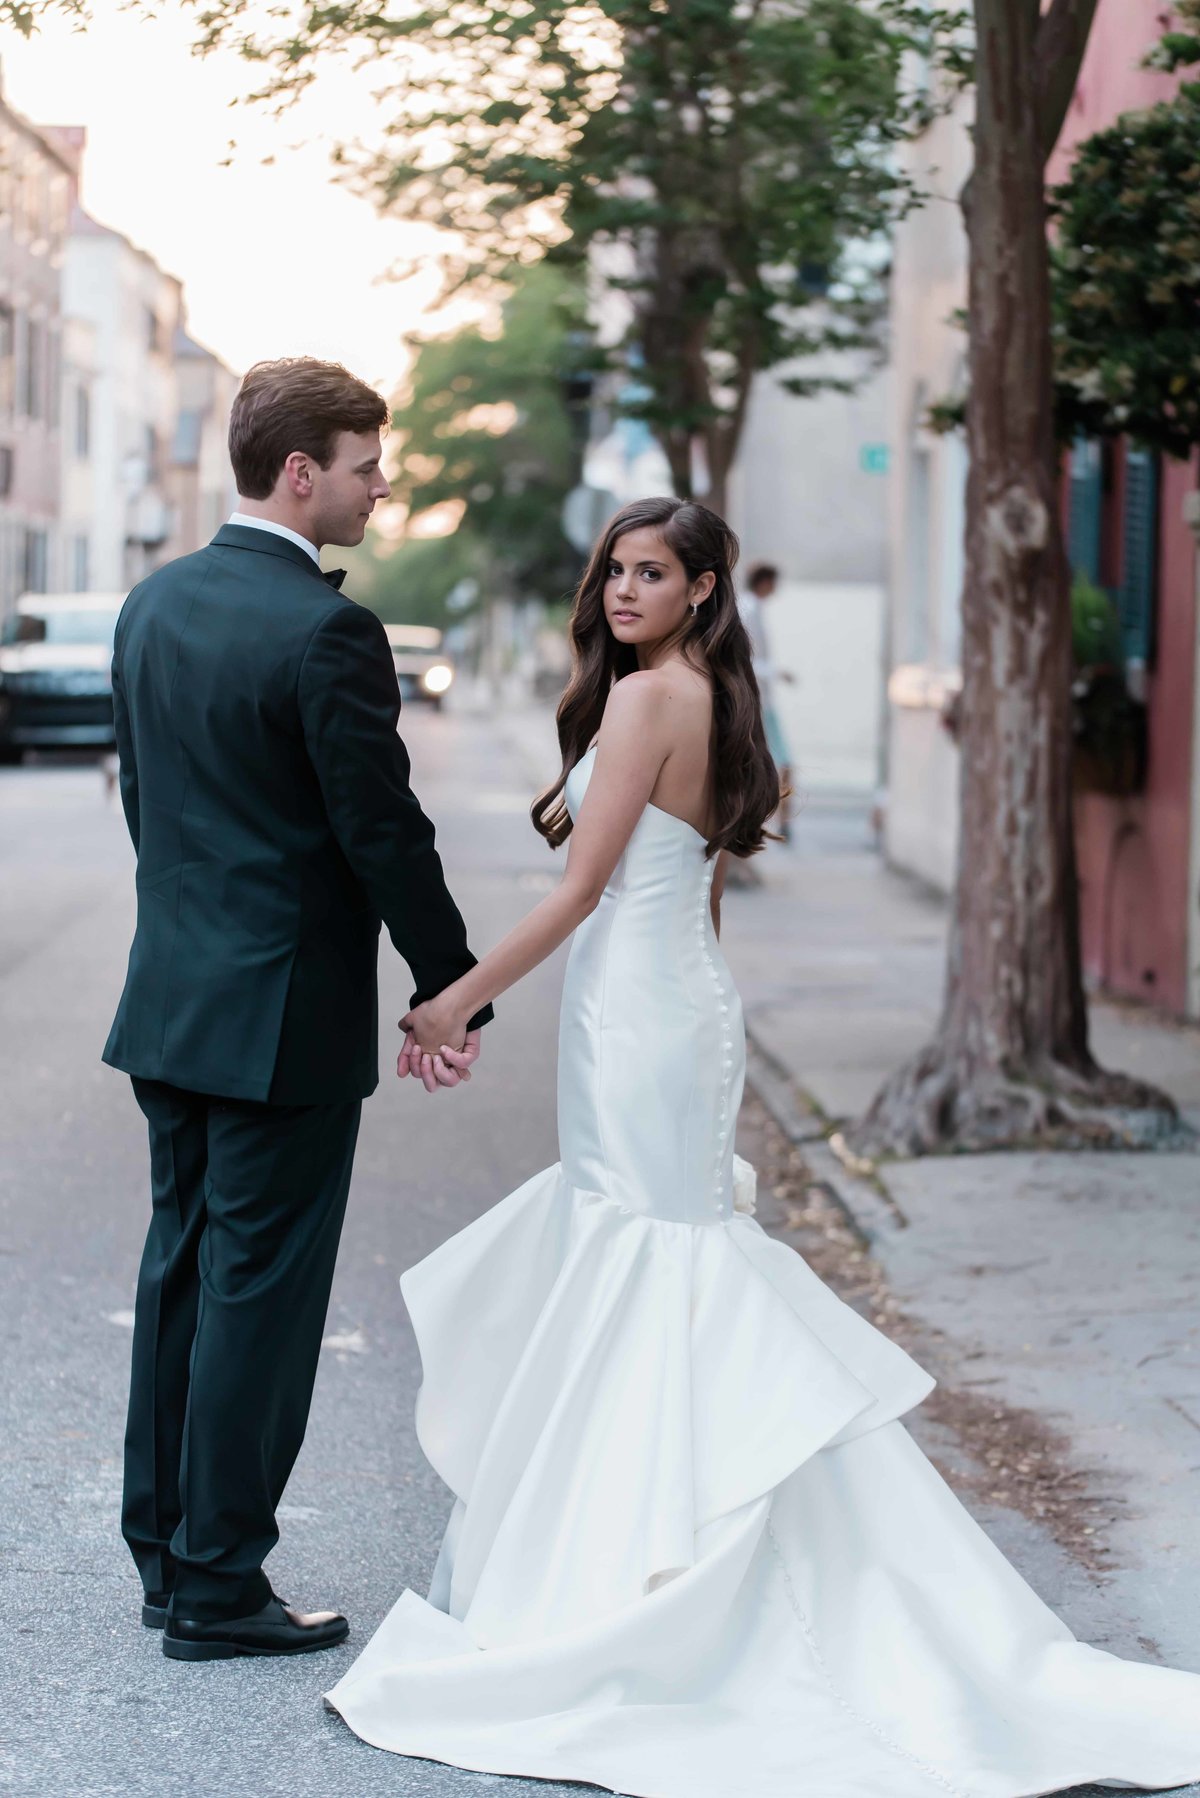 Bride and groom portraits around downtown Charleston, SC at sunset